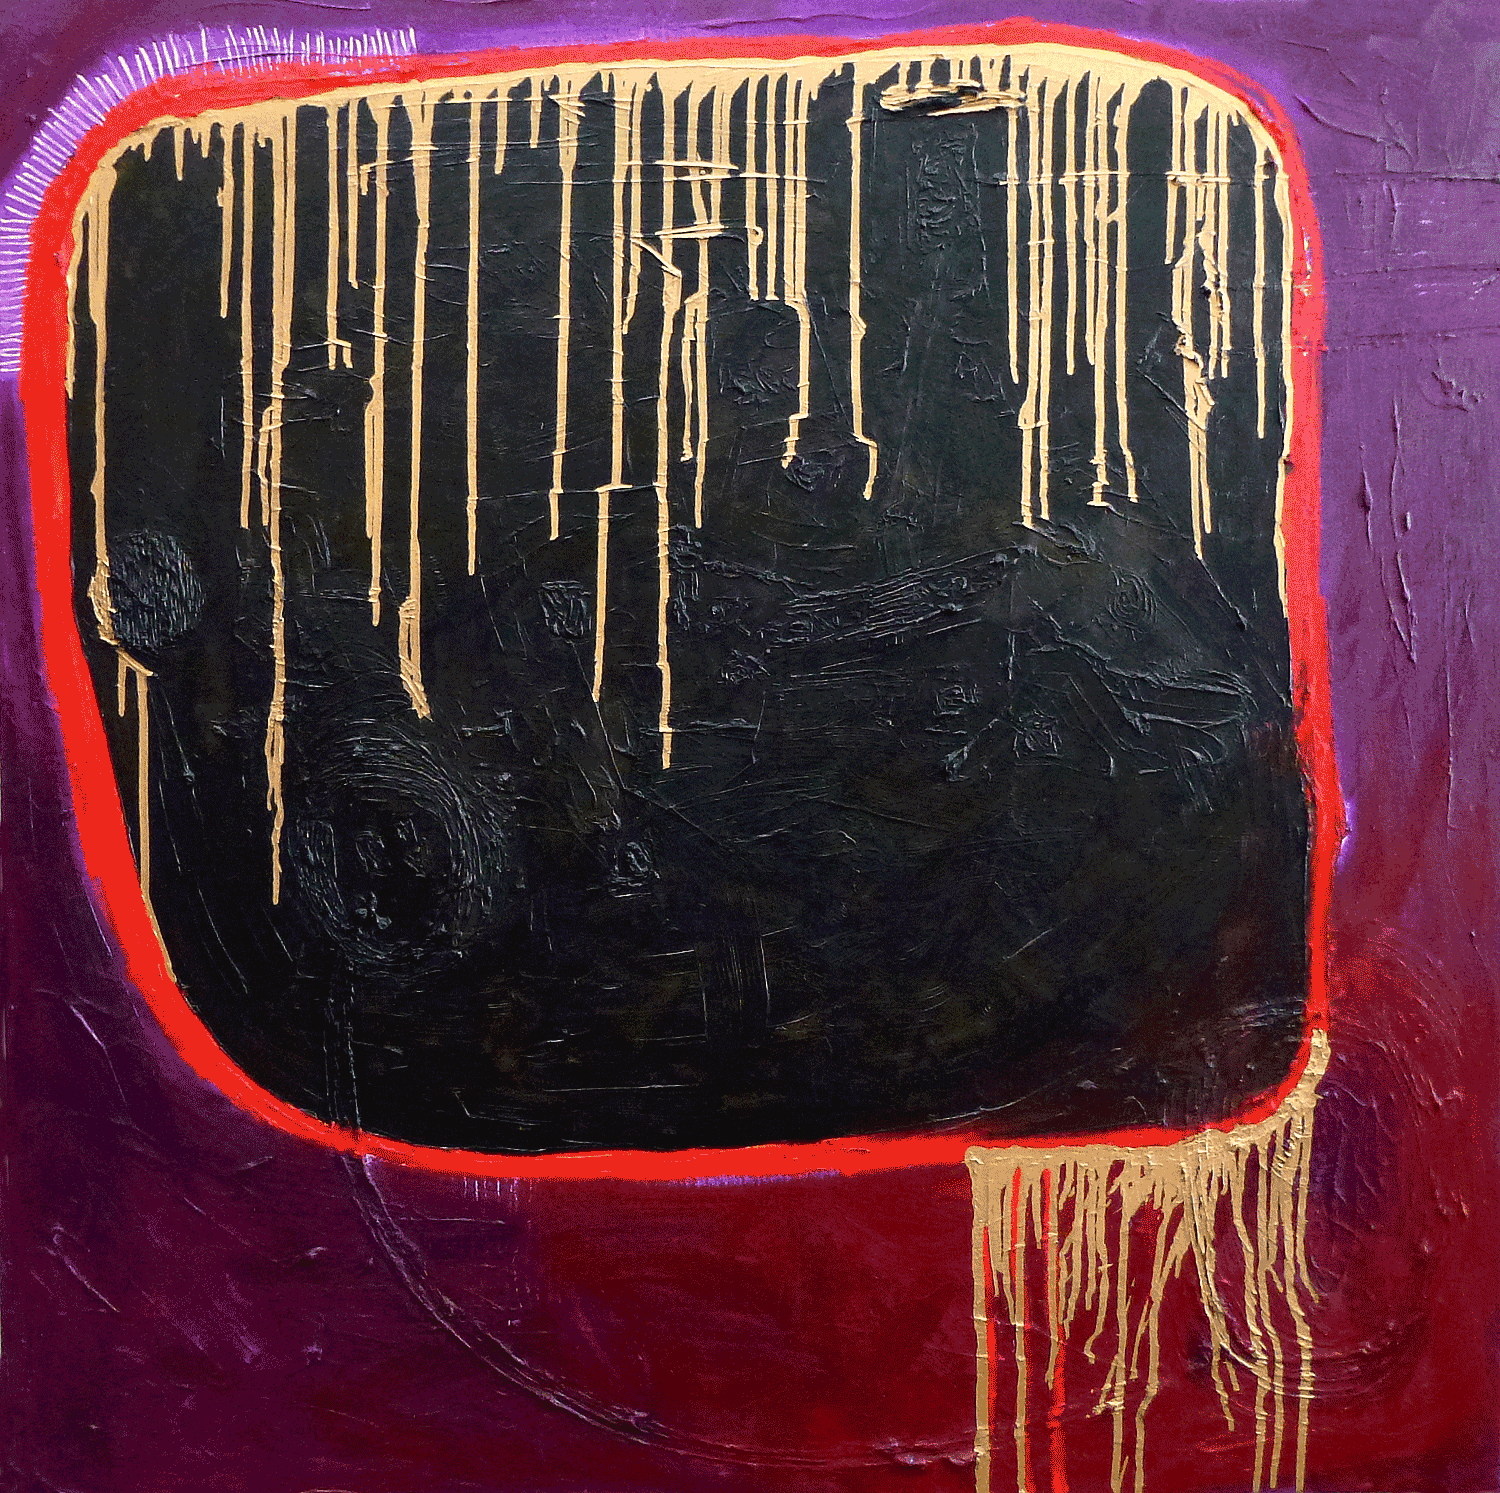  Have You Heard? 2.0  2011 | oil on canvas | 40 x 40 | $2500 